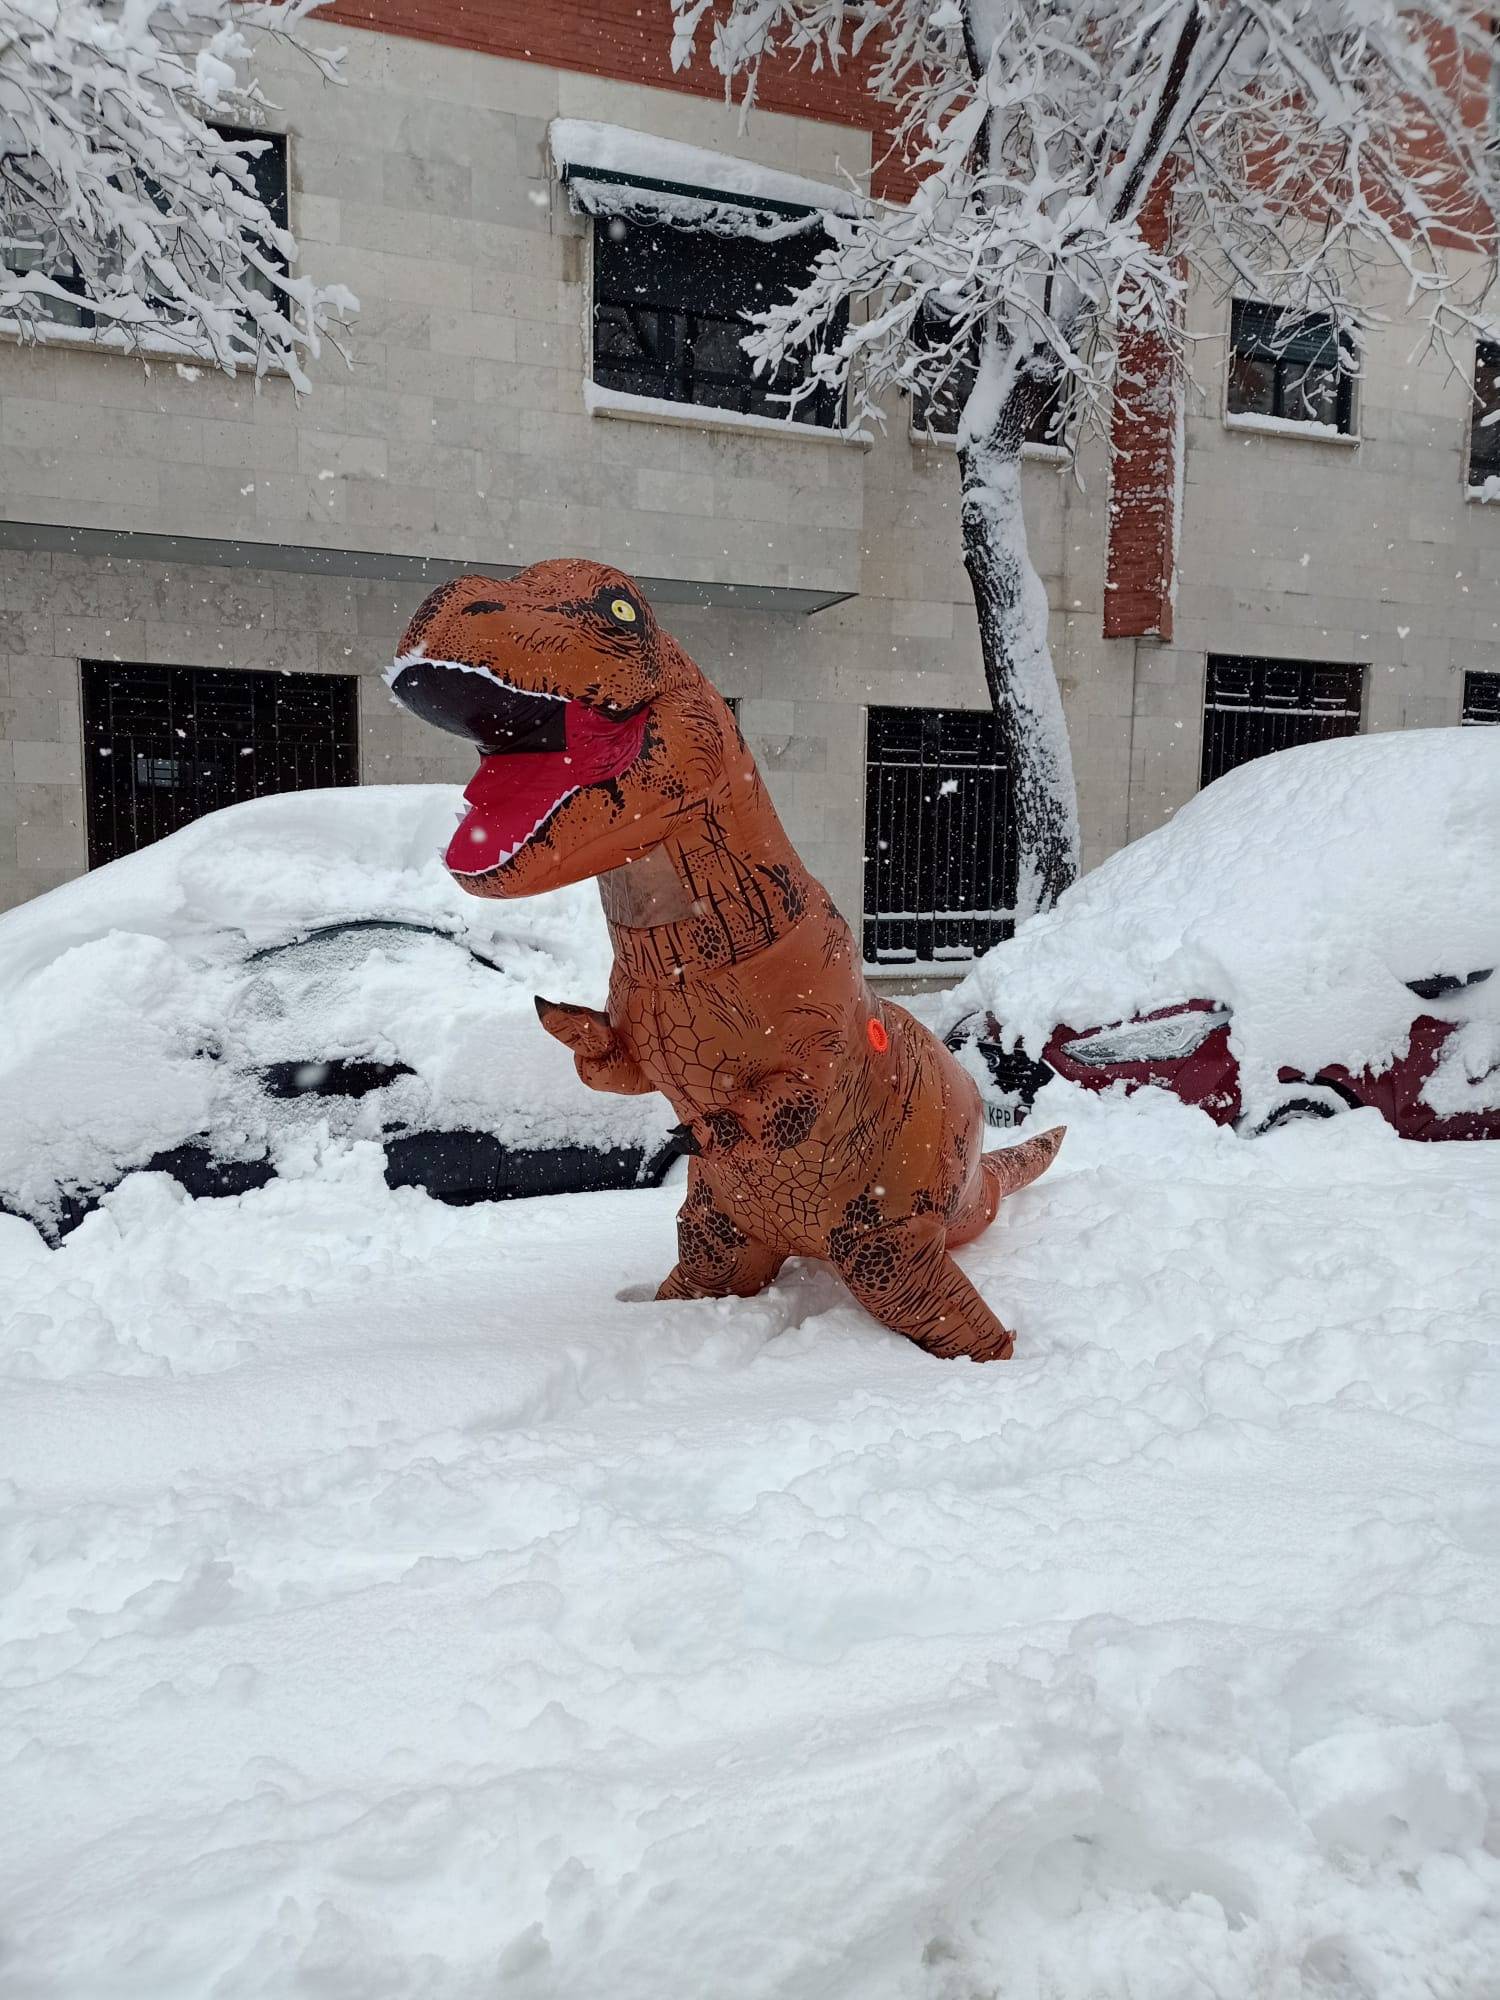 T-Rex checks out snow in Madrid